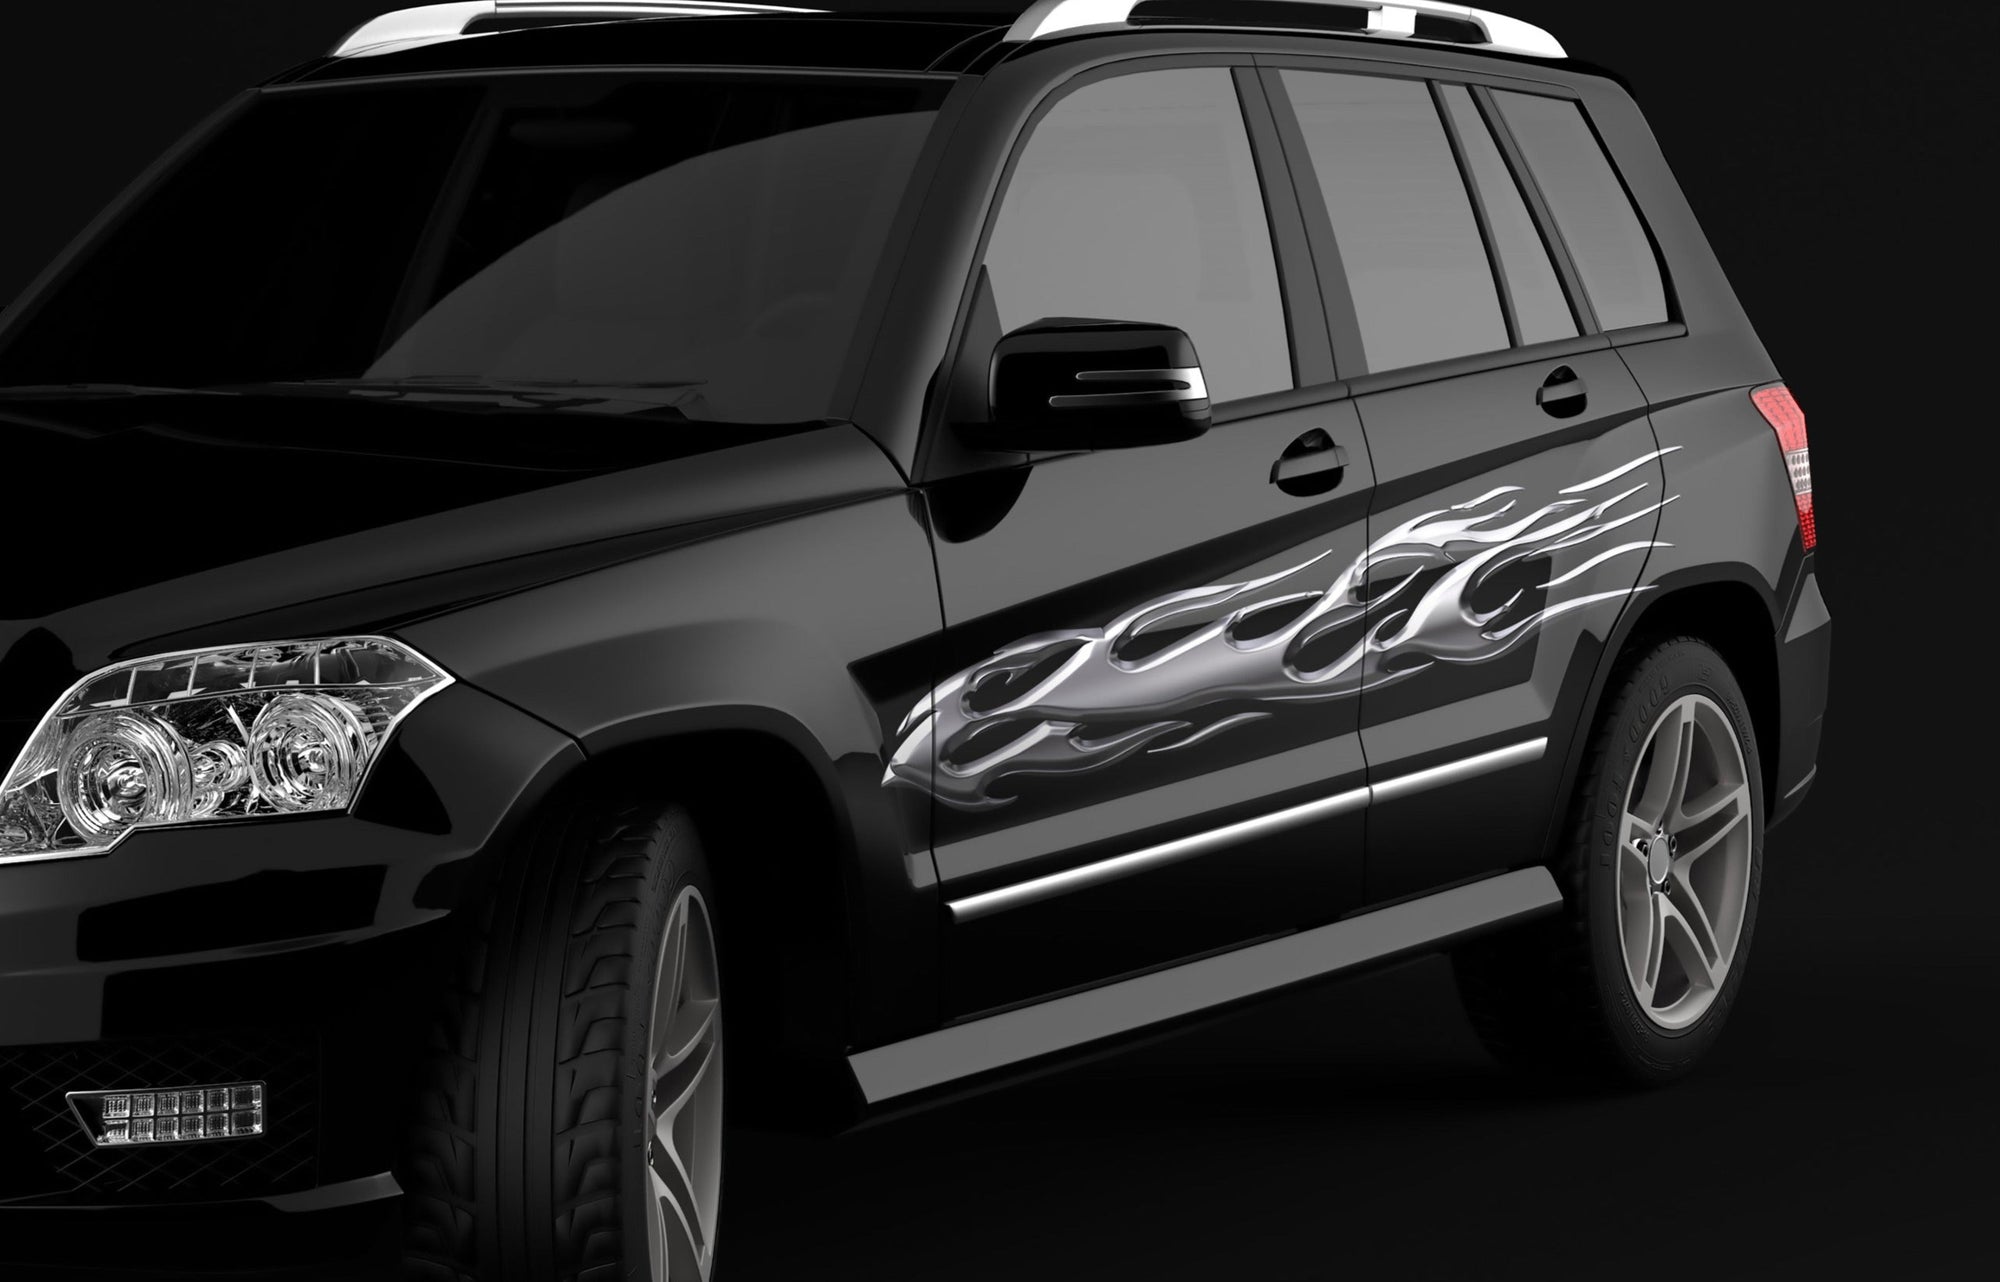 chrome flames side decals on black Suv 